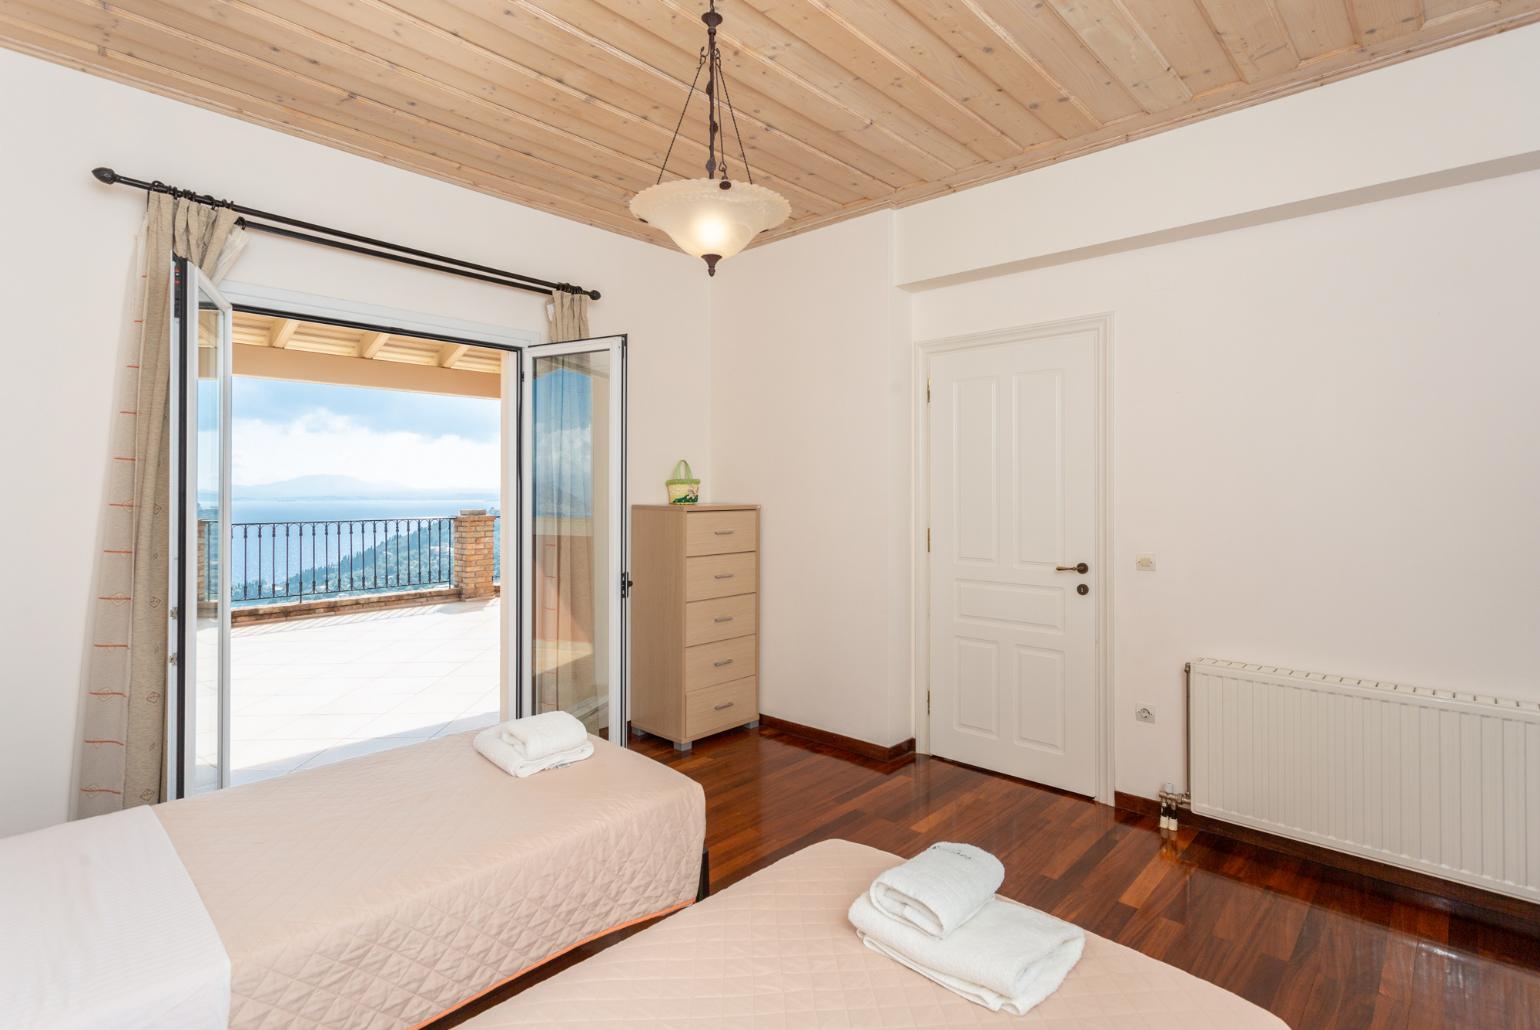 Twin bedroom with en suite bathroom, A/C, and upper terrace access with panoramic sea views